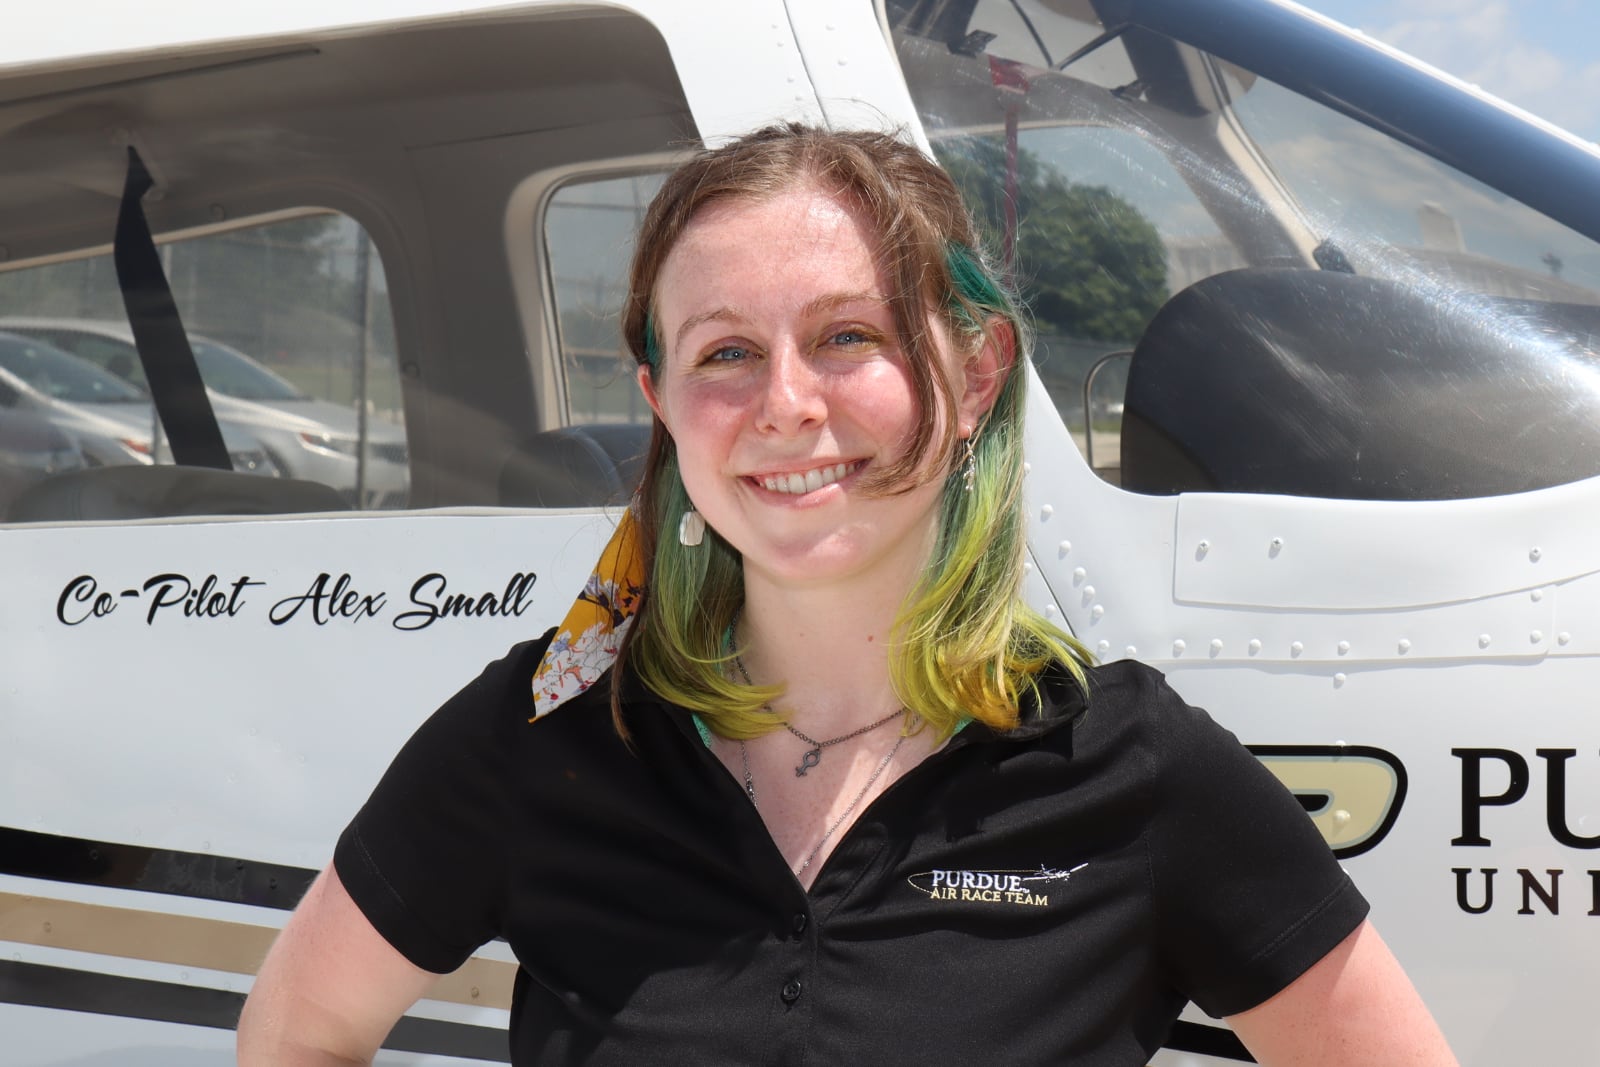 Alex Small, a senior in professional flight and cybersecurity at Purdue University, is one of two pilots flying for Purdue’s Air Race Classic team. (Purdue University photo/John O'Malley)